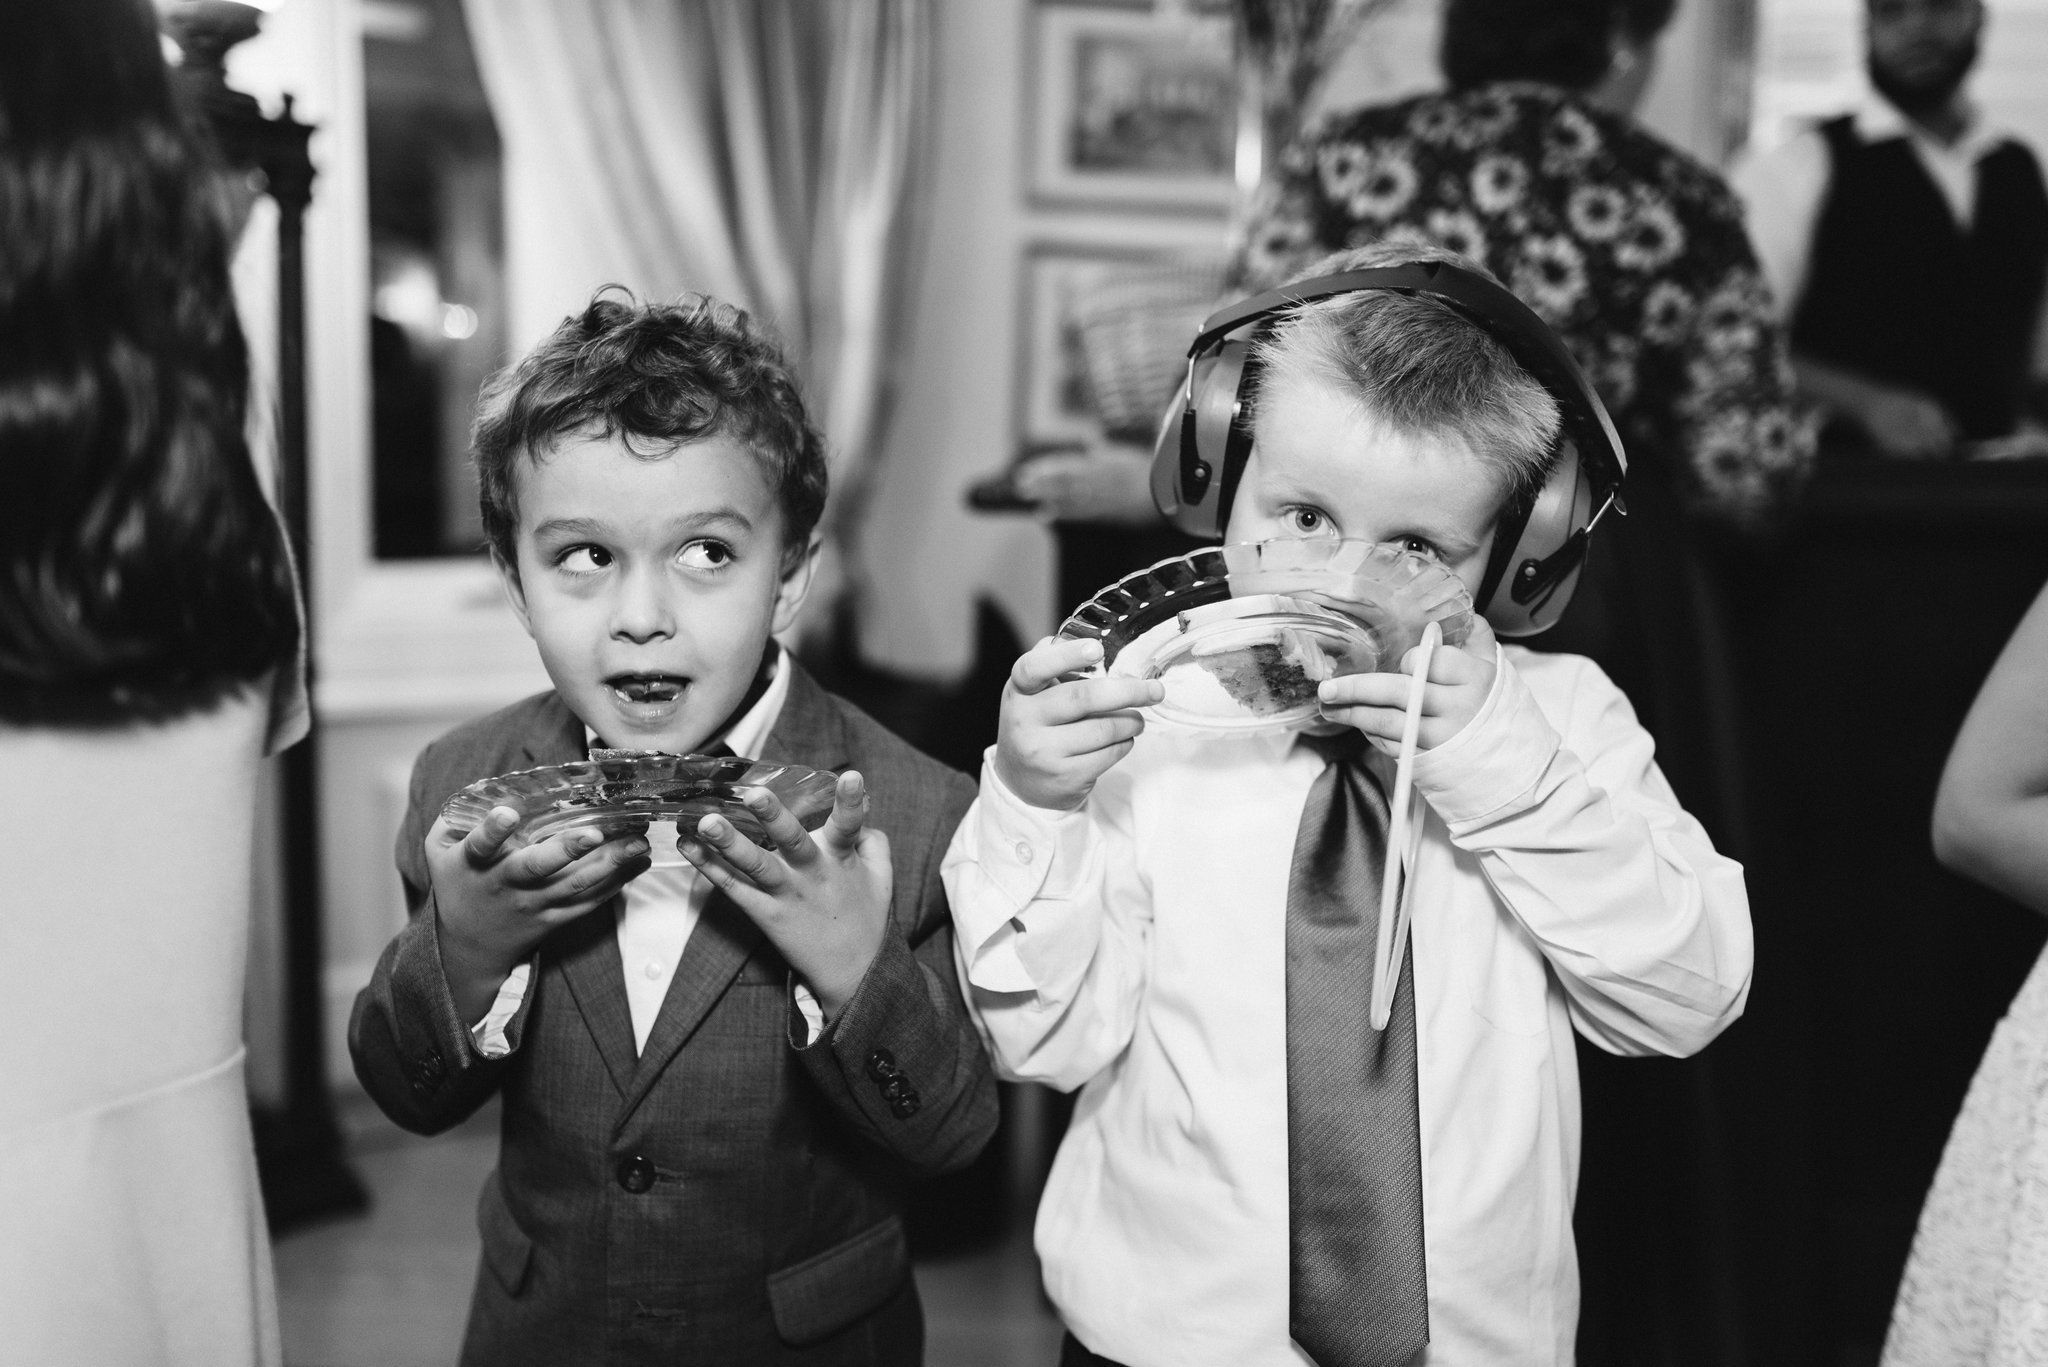  Ellicott City, Baltimore Wedding Photographer, Wayside Inn, Summer Wedding, Romantic, Traditional, Little Boys Having Dessert at Reception, Once Upon a Crumb, Black and White Photo 